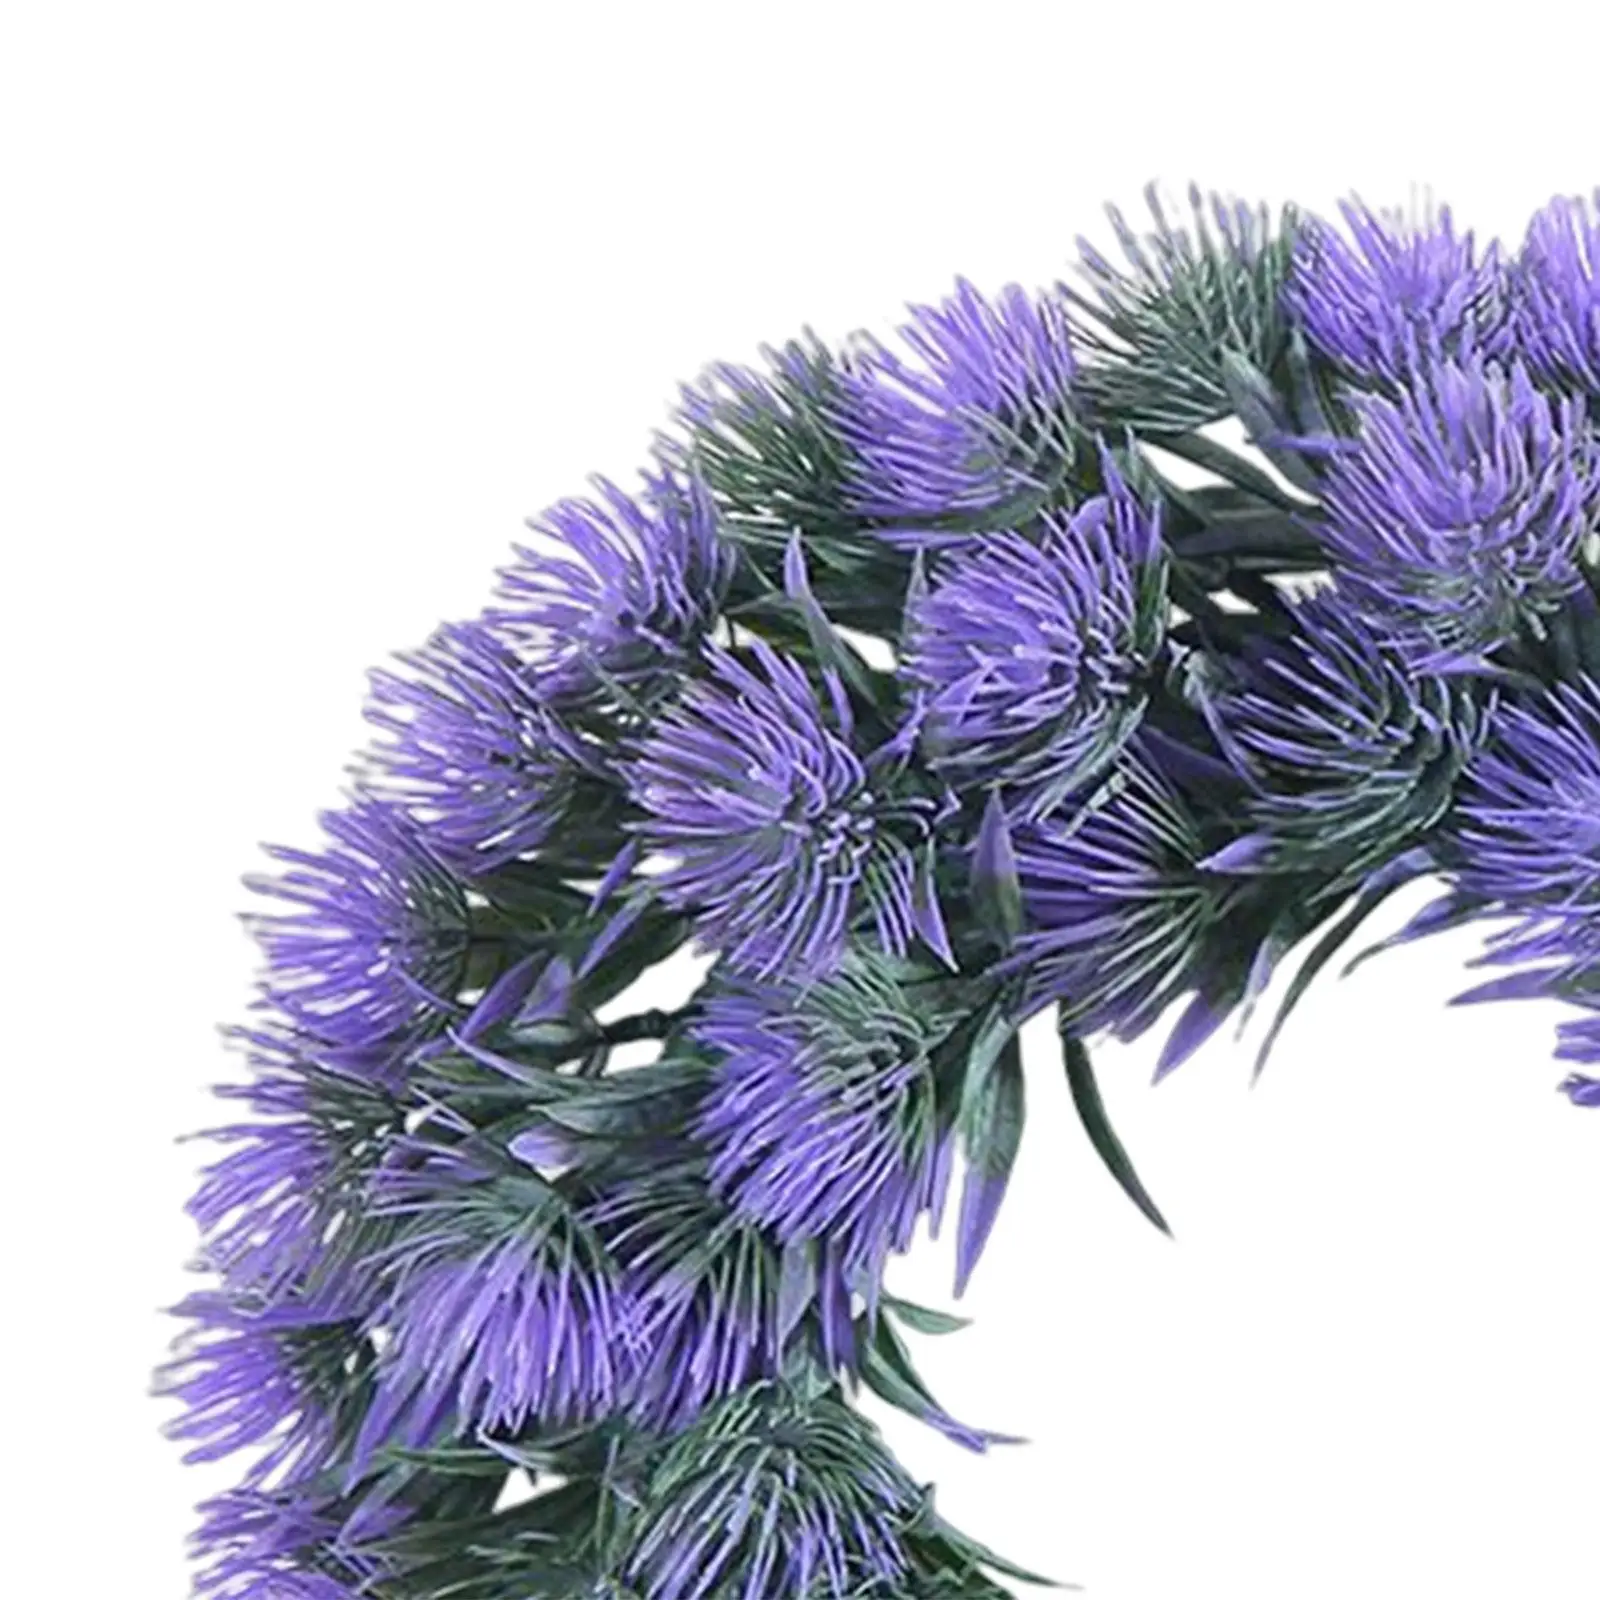 Lavender Wreath for Front Door Summer Wreath 38cm Spring Wreath Floral Wreath Greenery Garland for Home Party Wall Wedding Decor